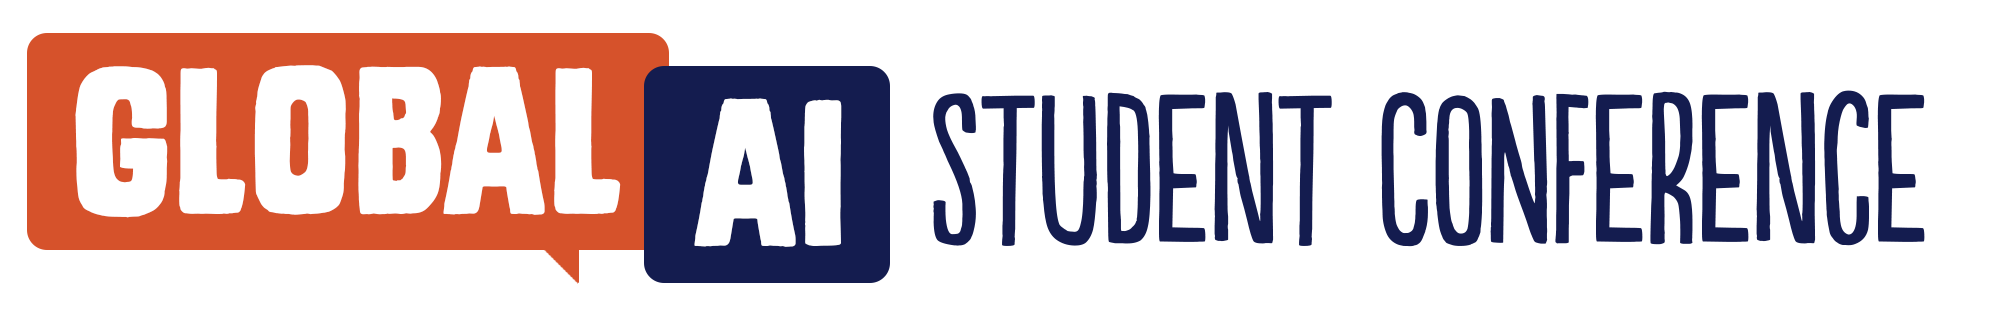 Global AI Student Conference Logo